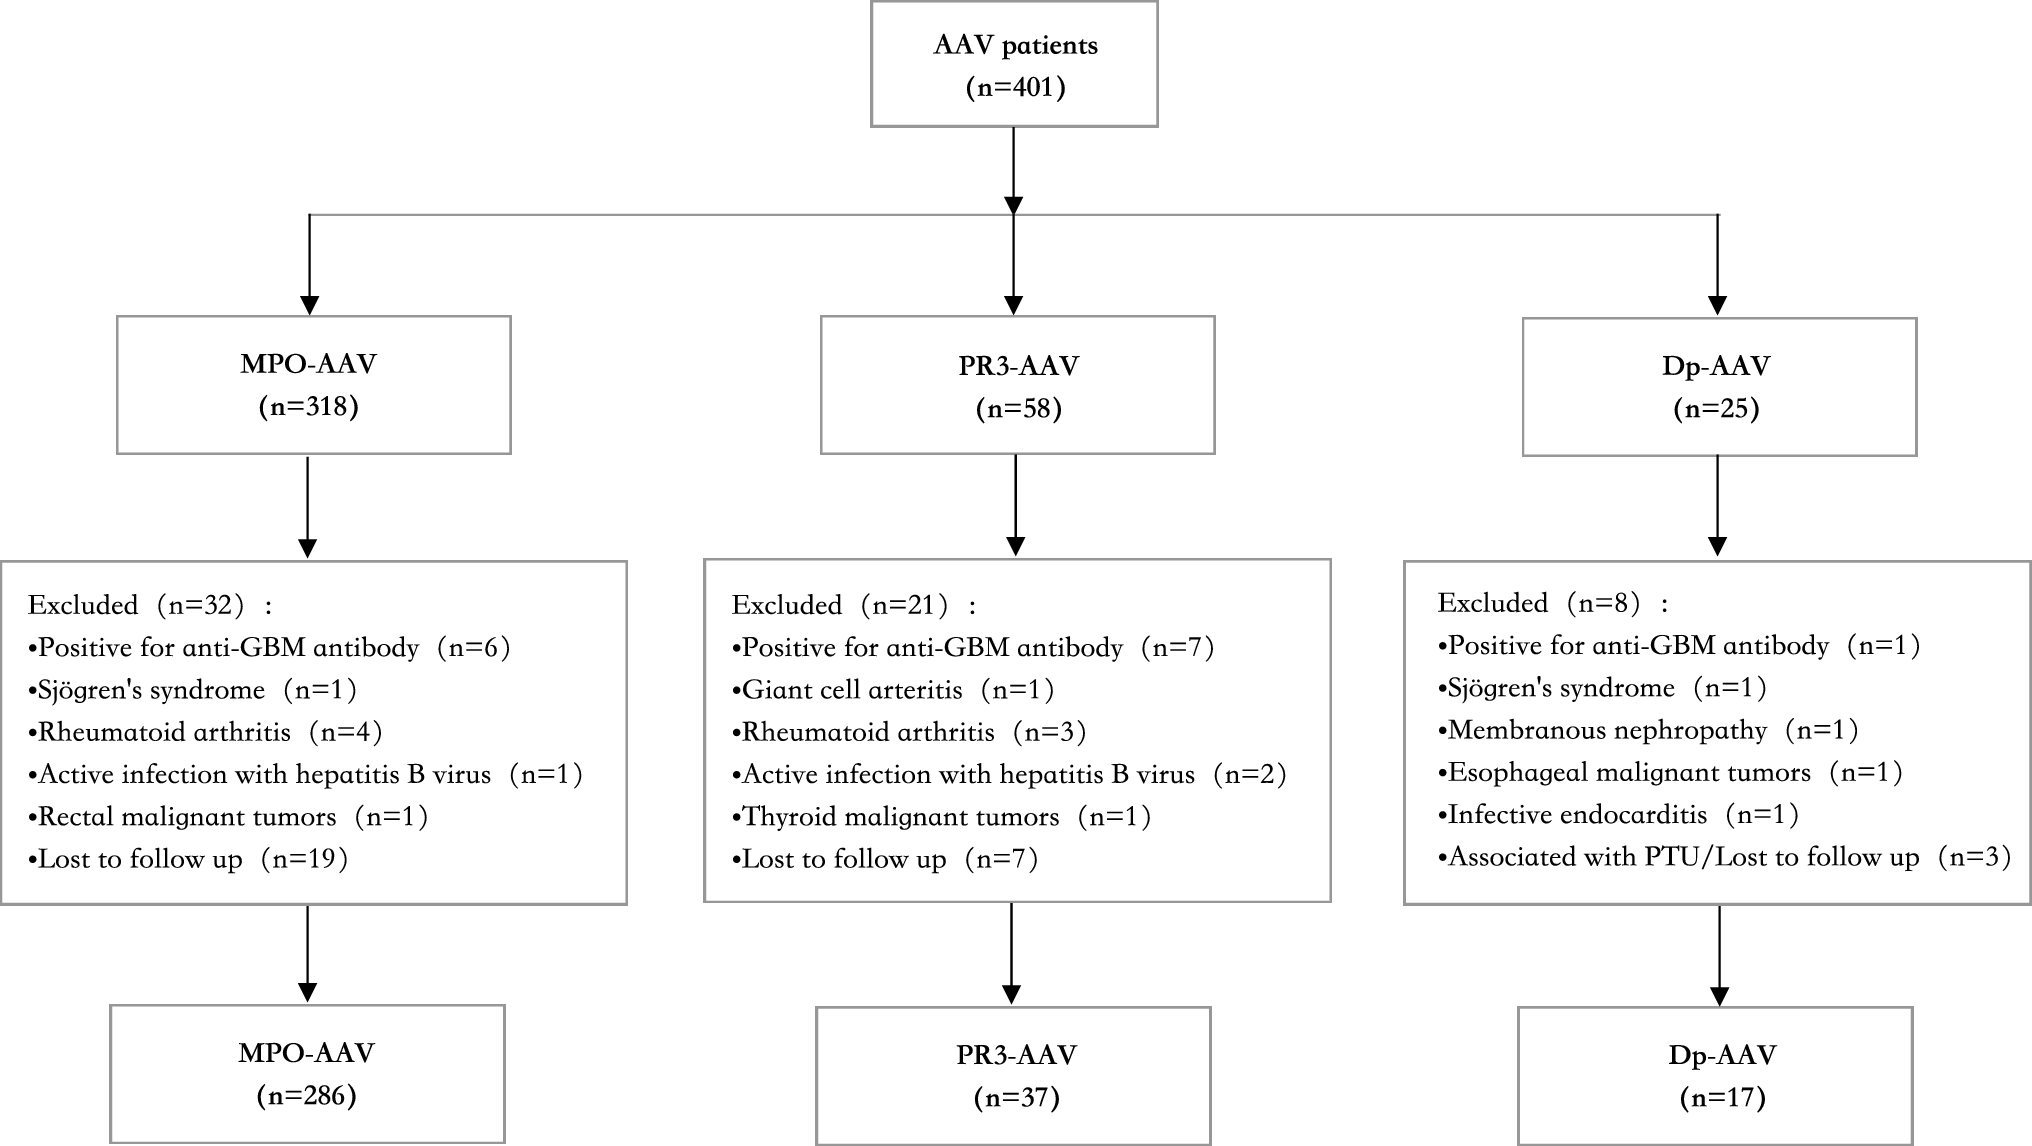 Clinical features and prognosis of ANCA-associated vasculitis patients who were double-seropositive for myeloperoxidase-ANCA and proteinase 3-ANCA